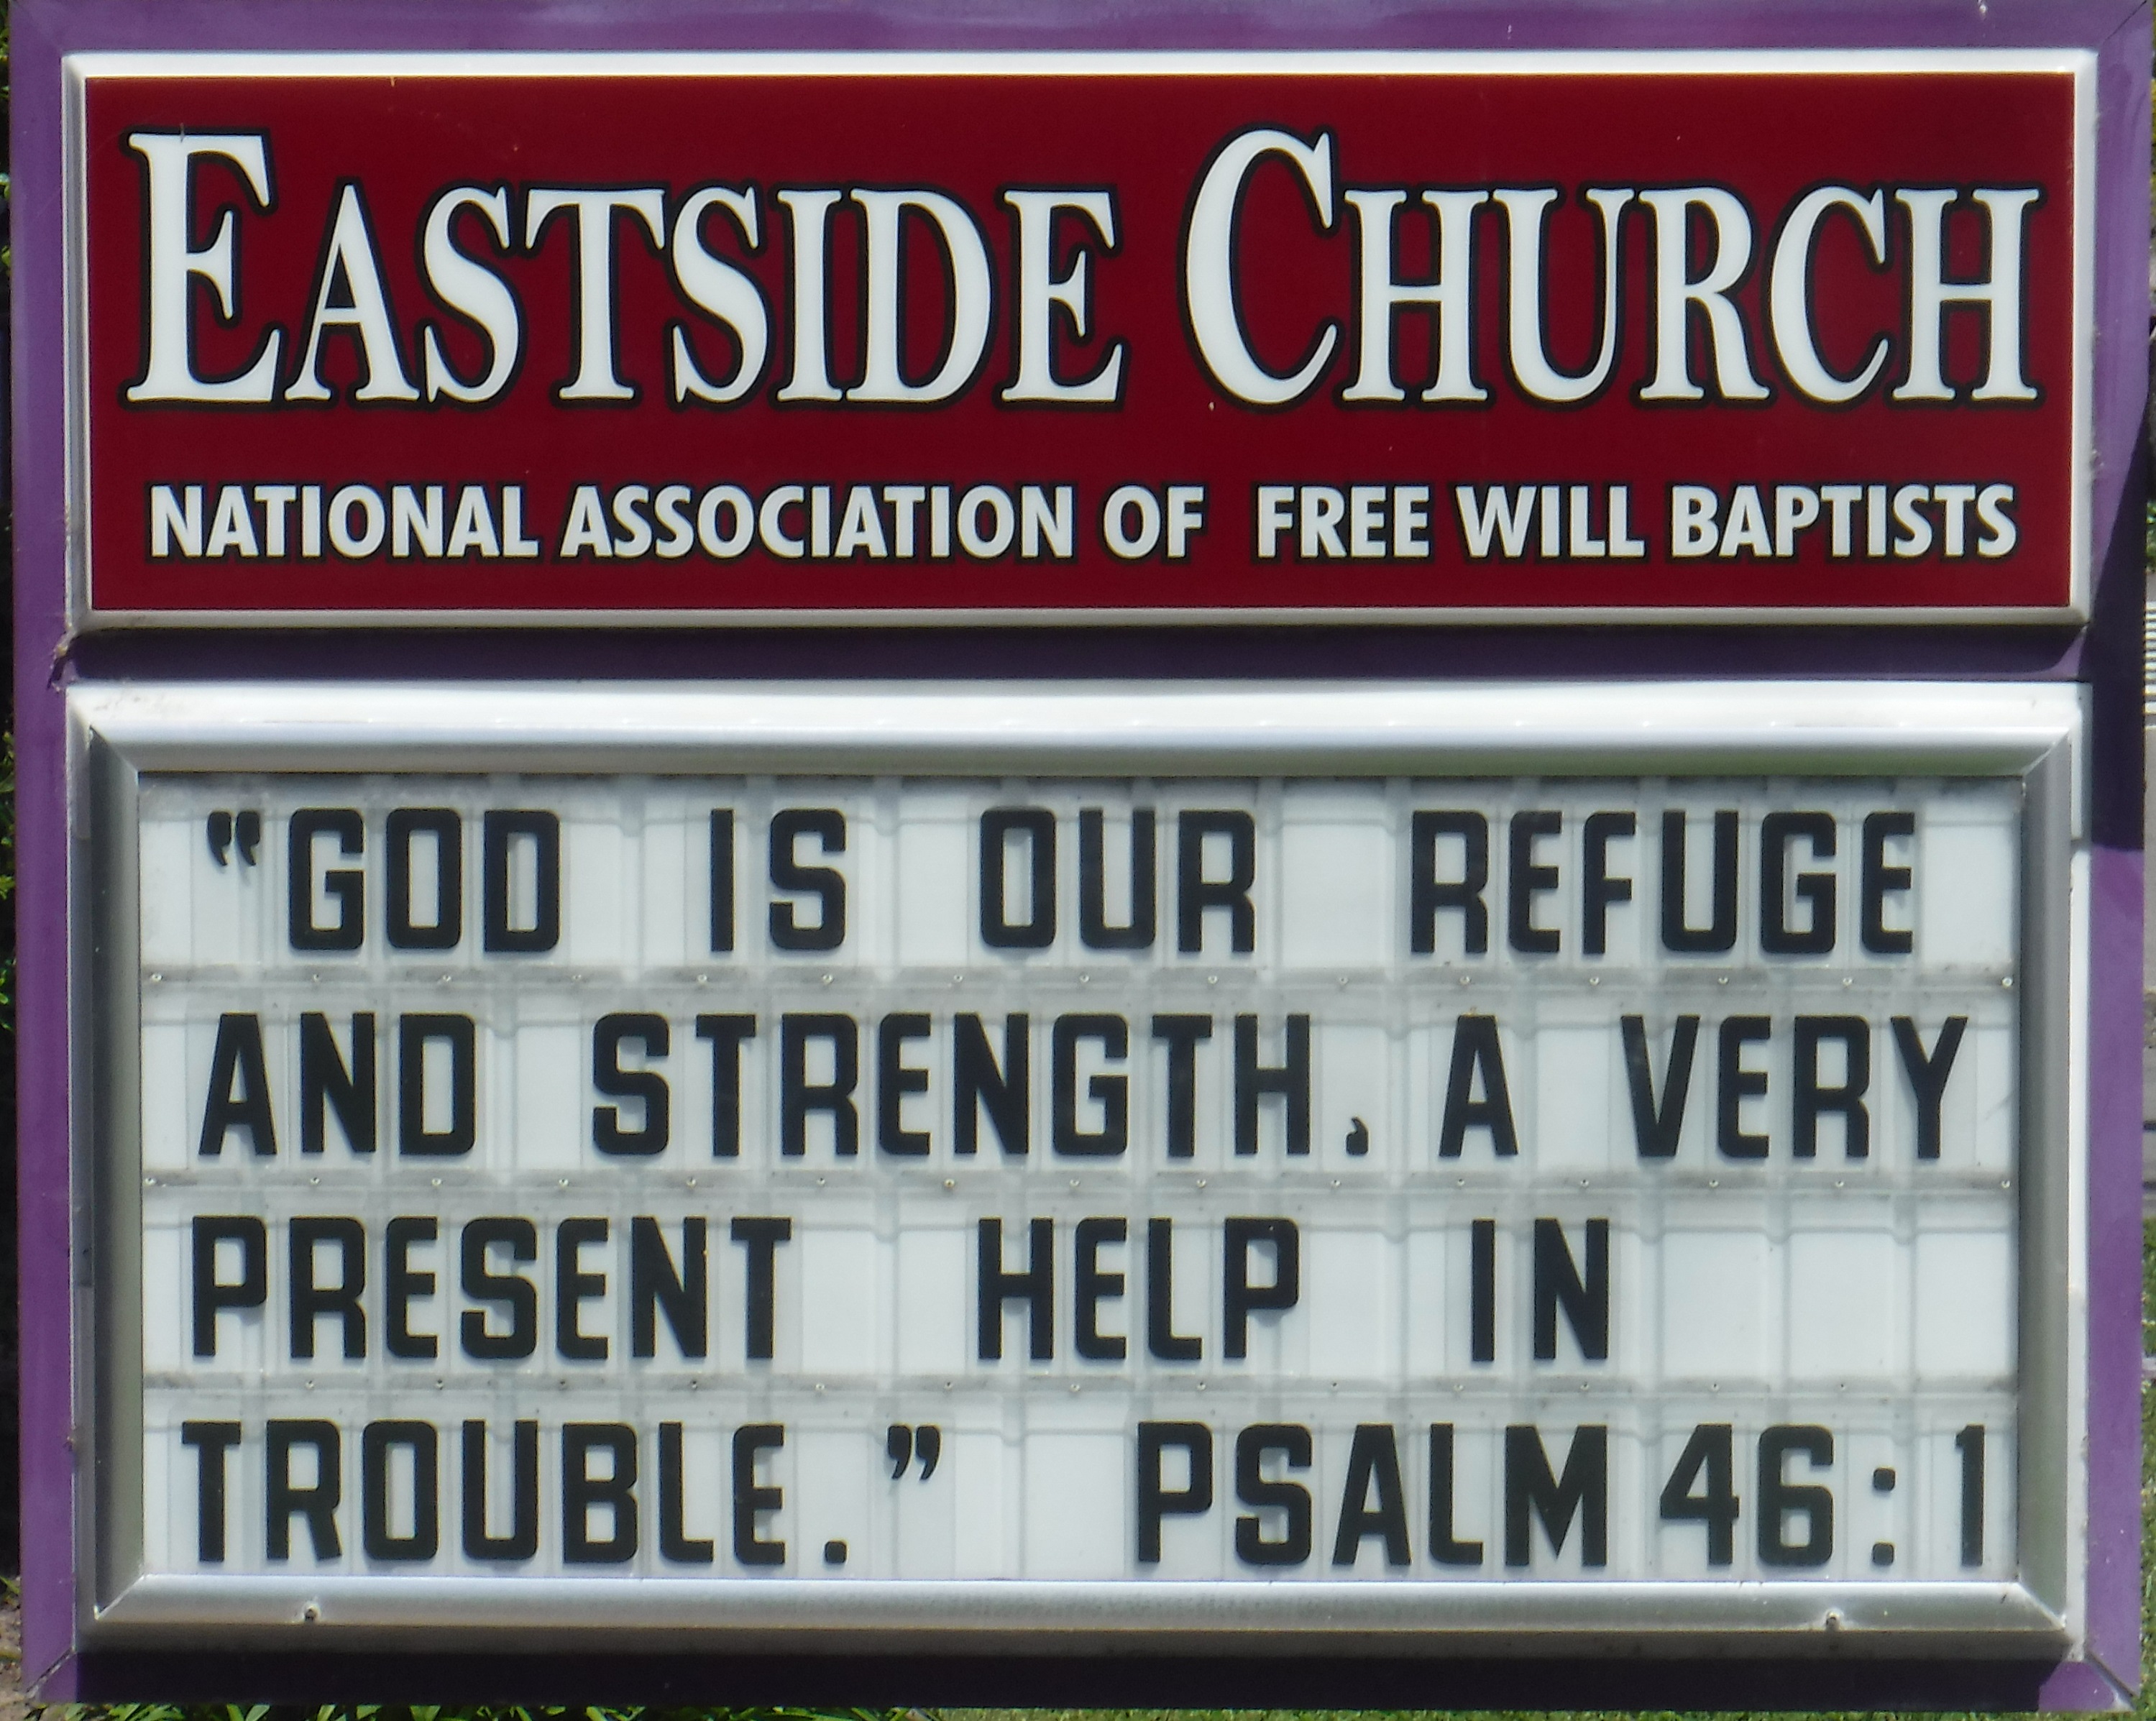 Photo taken by me of the church sign this week. 